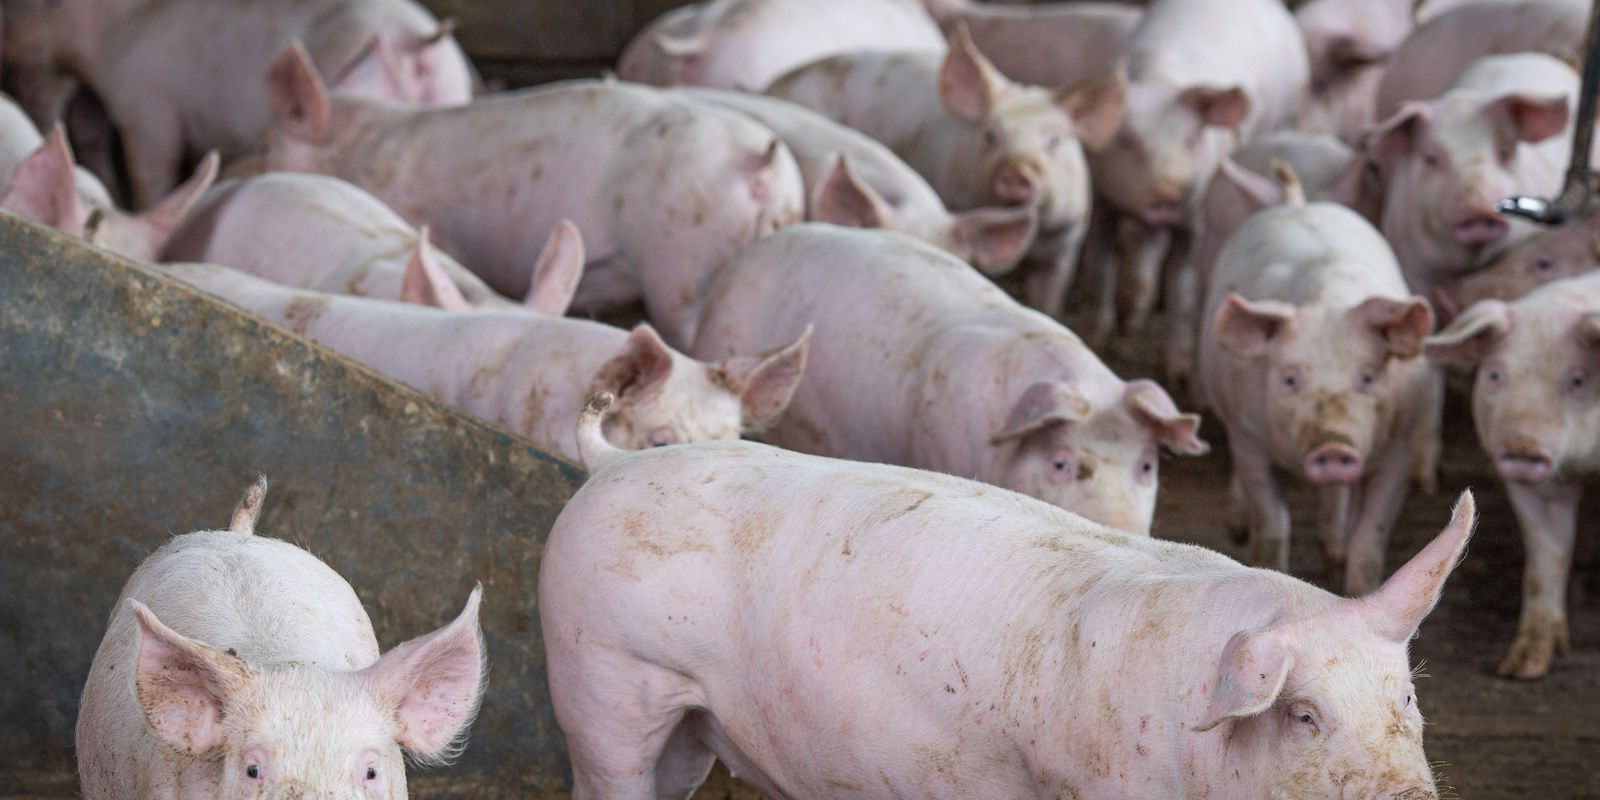 Slaughter of pigs hits record in the second quarter, says IBGE